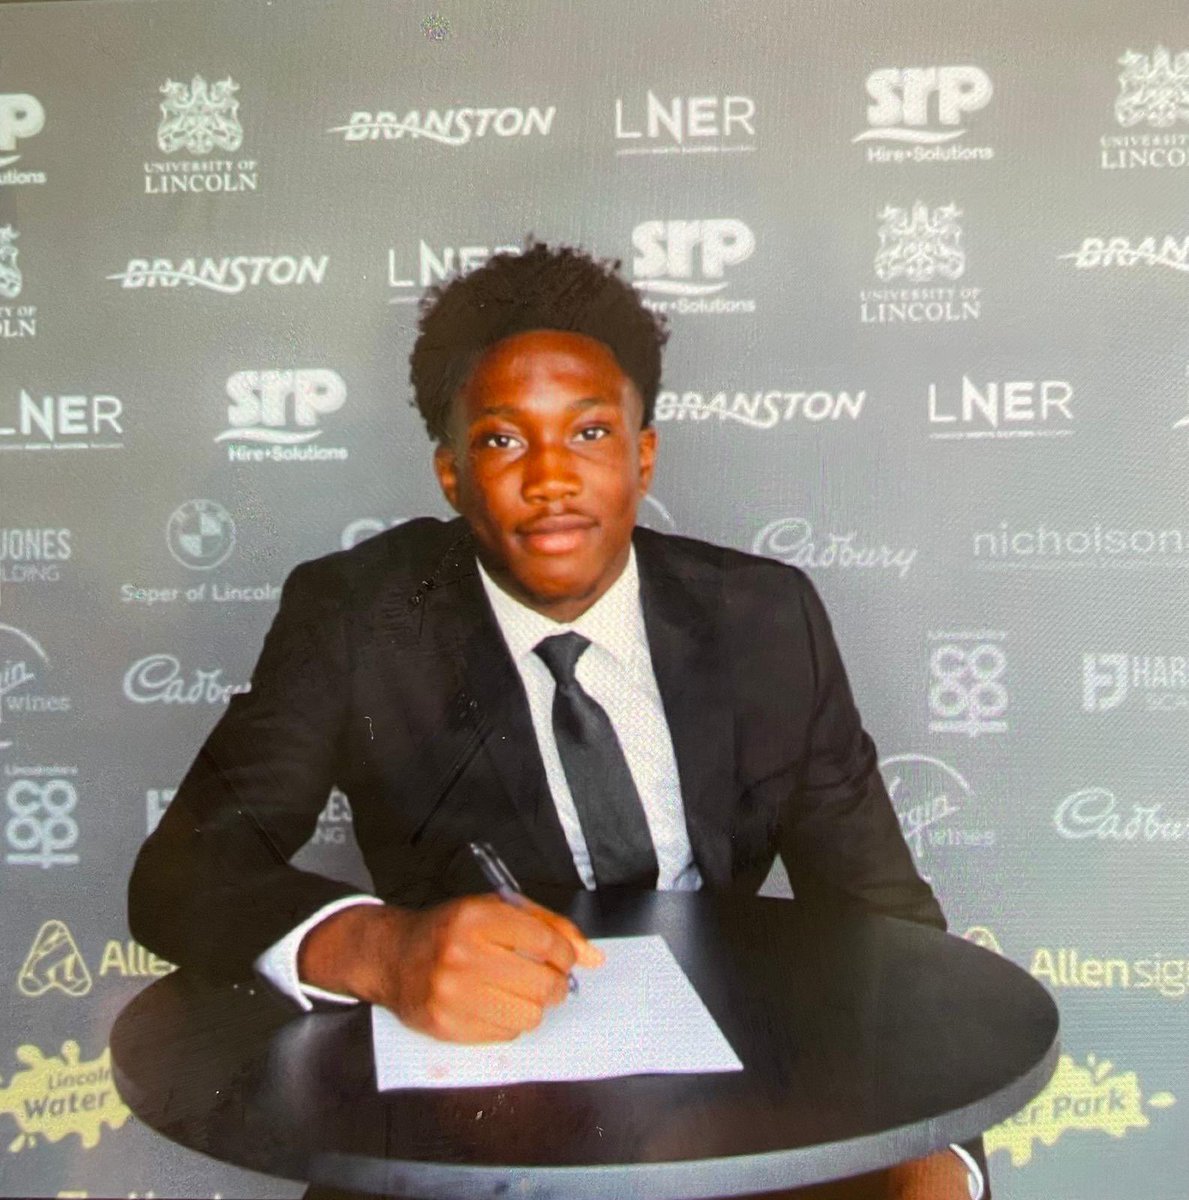 📣NEWS📣We’re delighted to hear that @ssq_alumni Gbolohan has signed for @LCFCAcademy @LincolnCity_FC always a treat to hear of such success stories! Even sweeter when we consider all the help + support he received from @PRCBC1 during his time here! Good luck Gbolohan! #TeamSSq